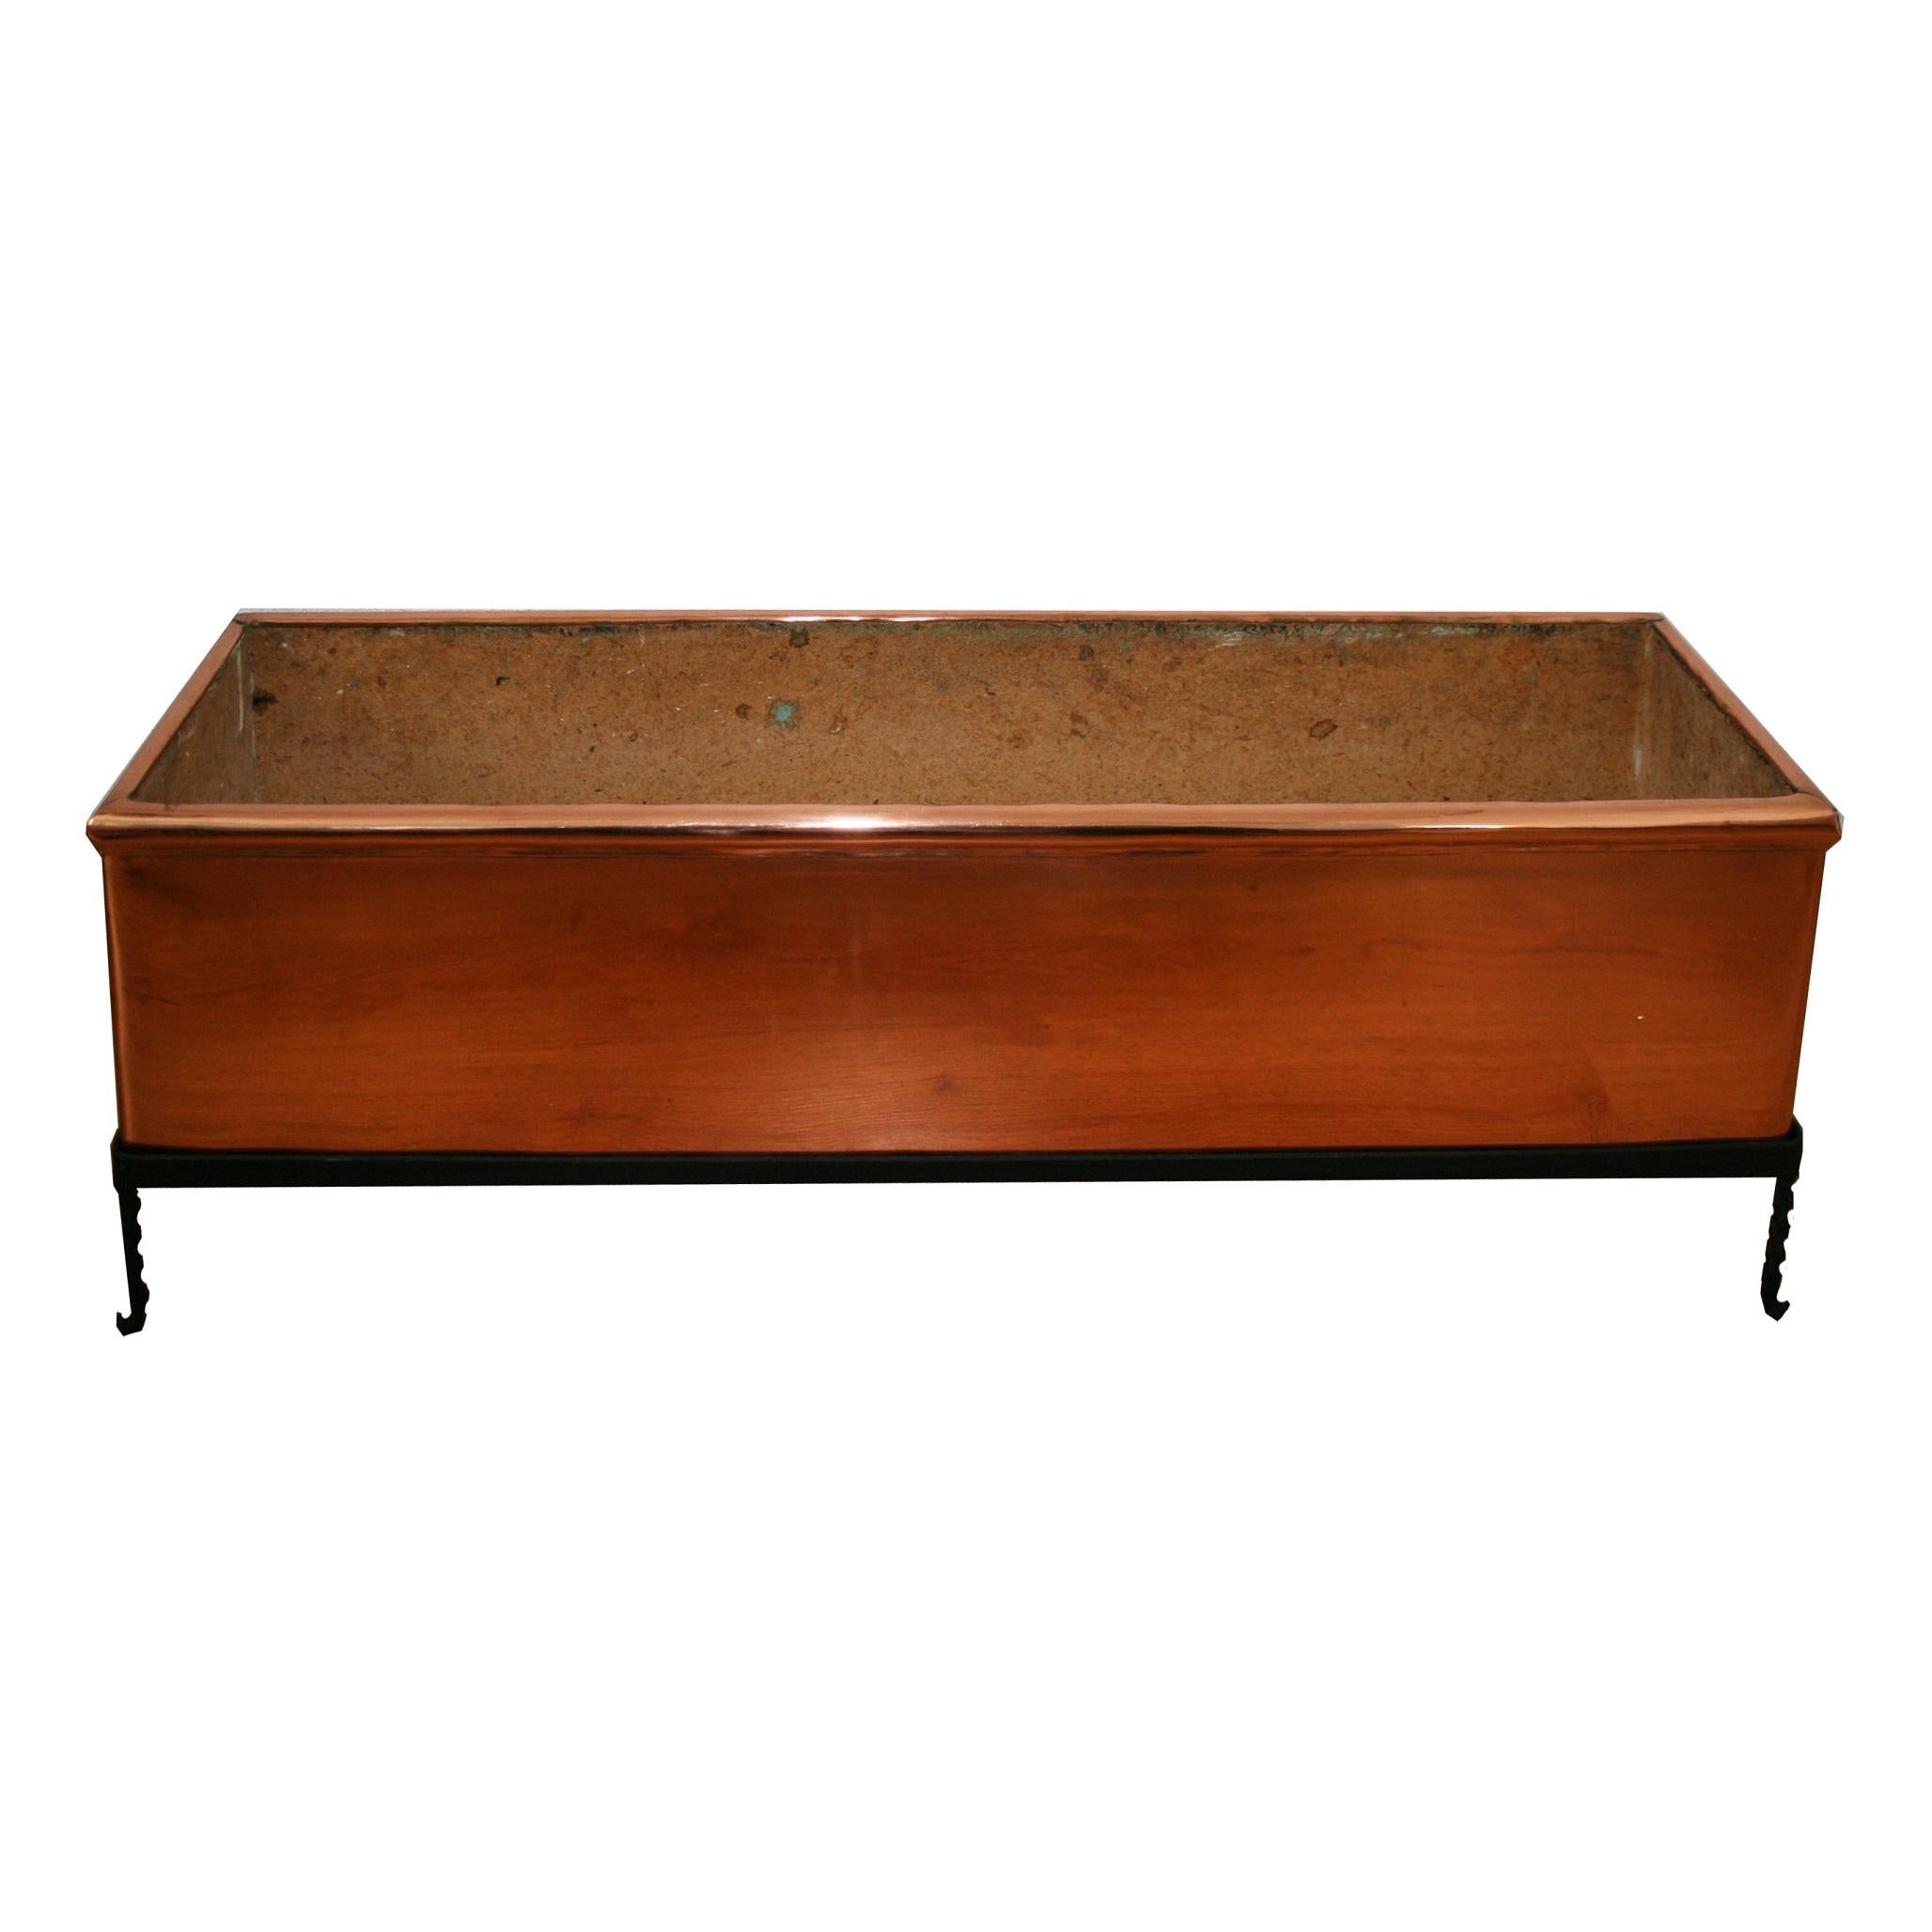 This elevated planter, designed to Stand freely on the floor, was made in Spain in the 1950s or 1960s.
Wooden interior this planter has a thick sheet copper and a independent wrought iron Stand.
Coming from a religious school, it has always been